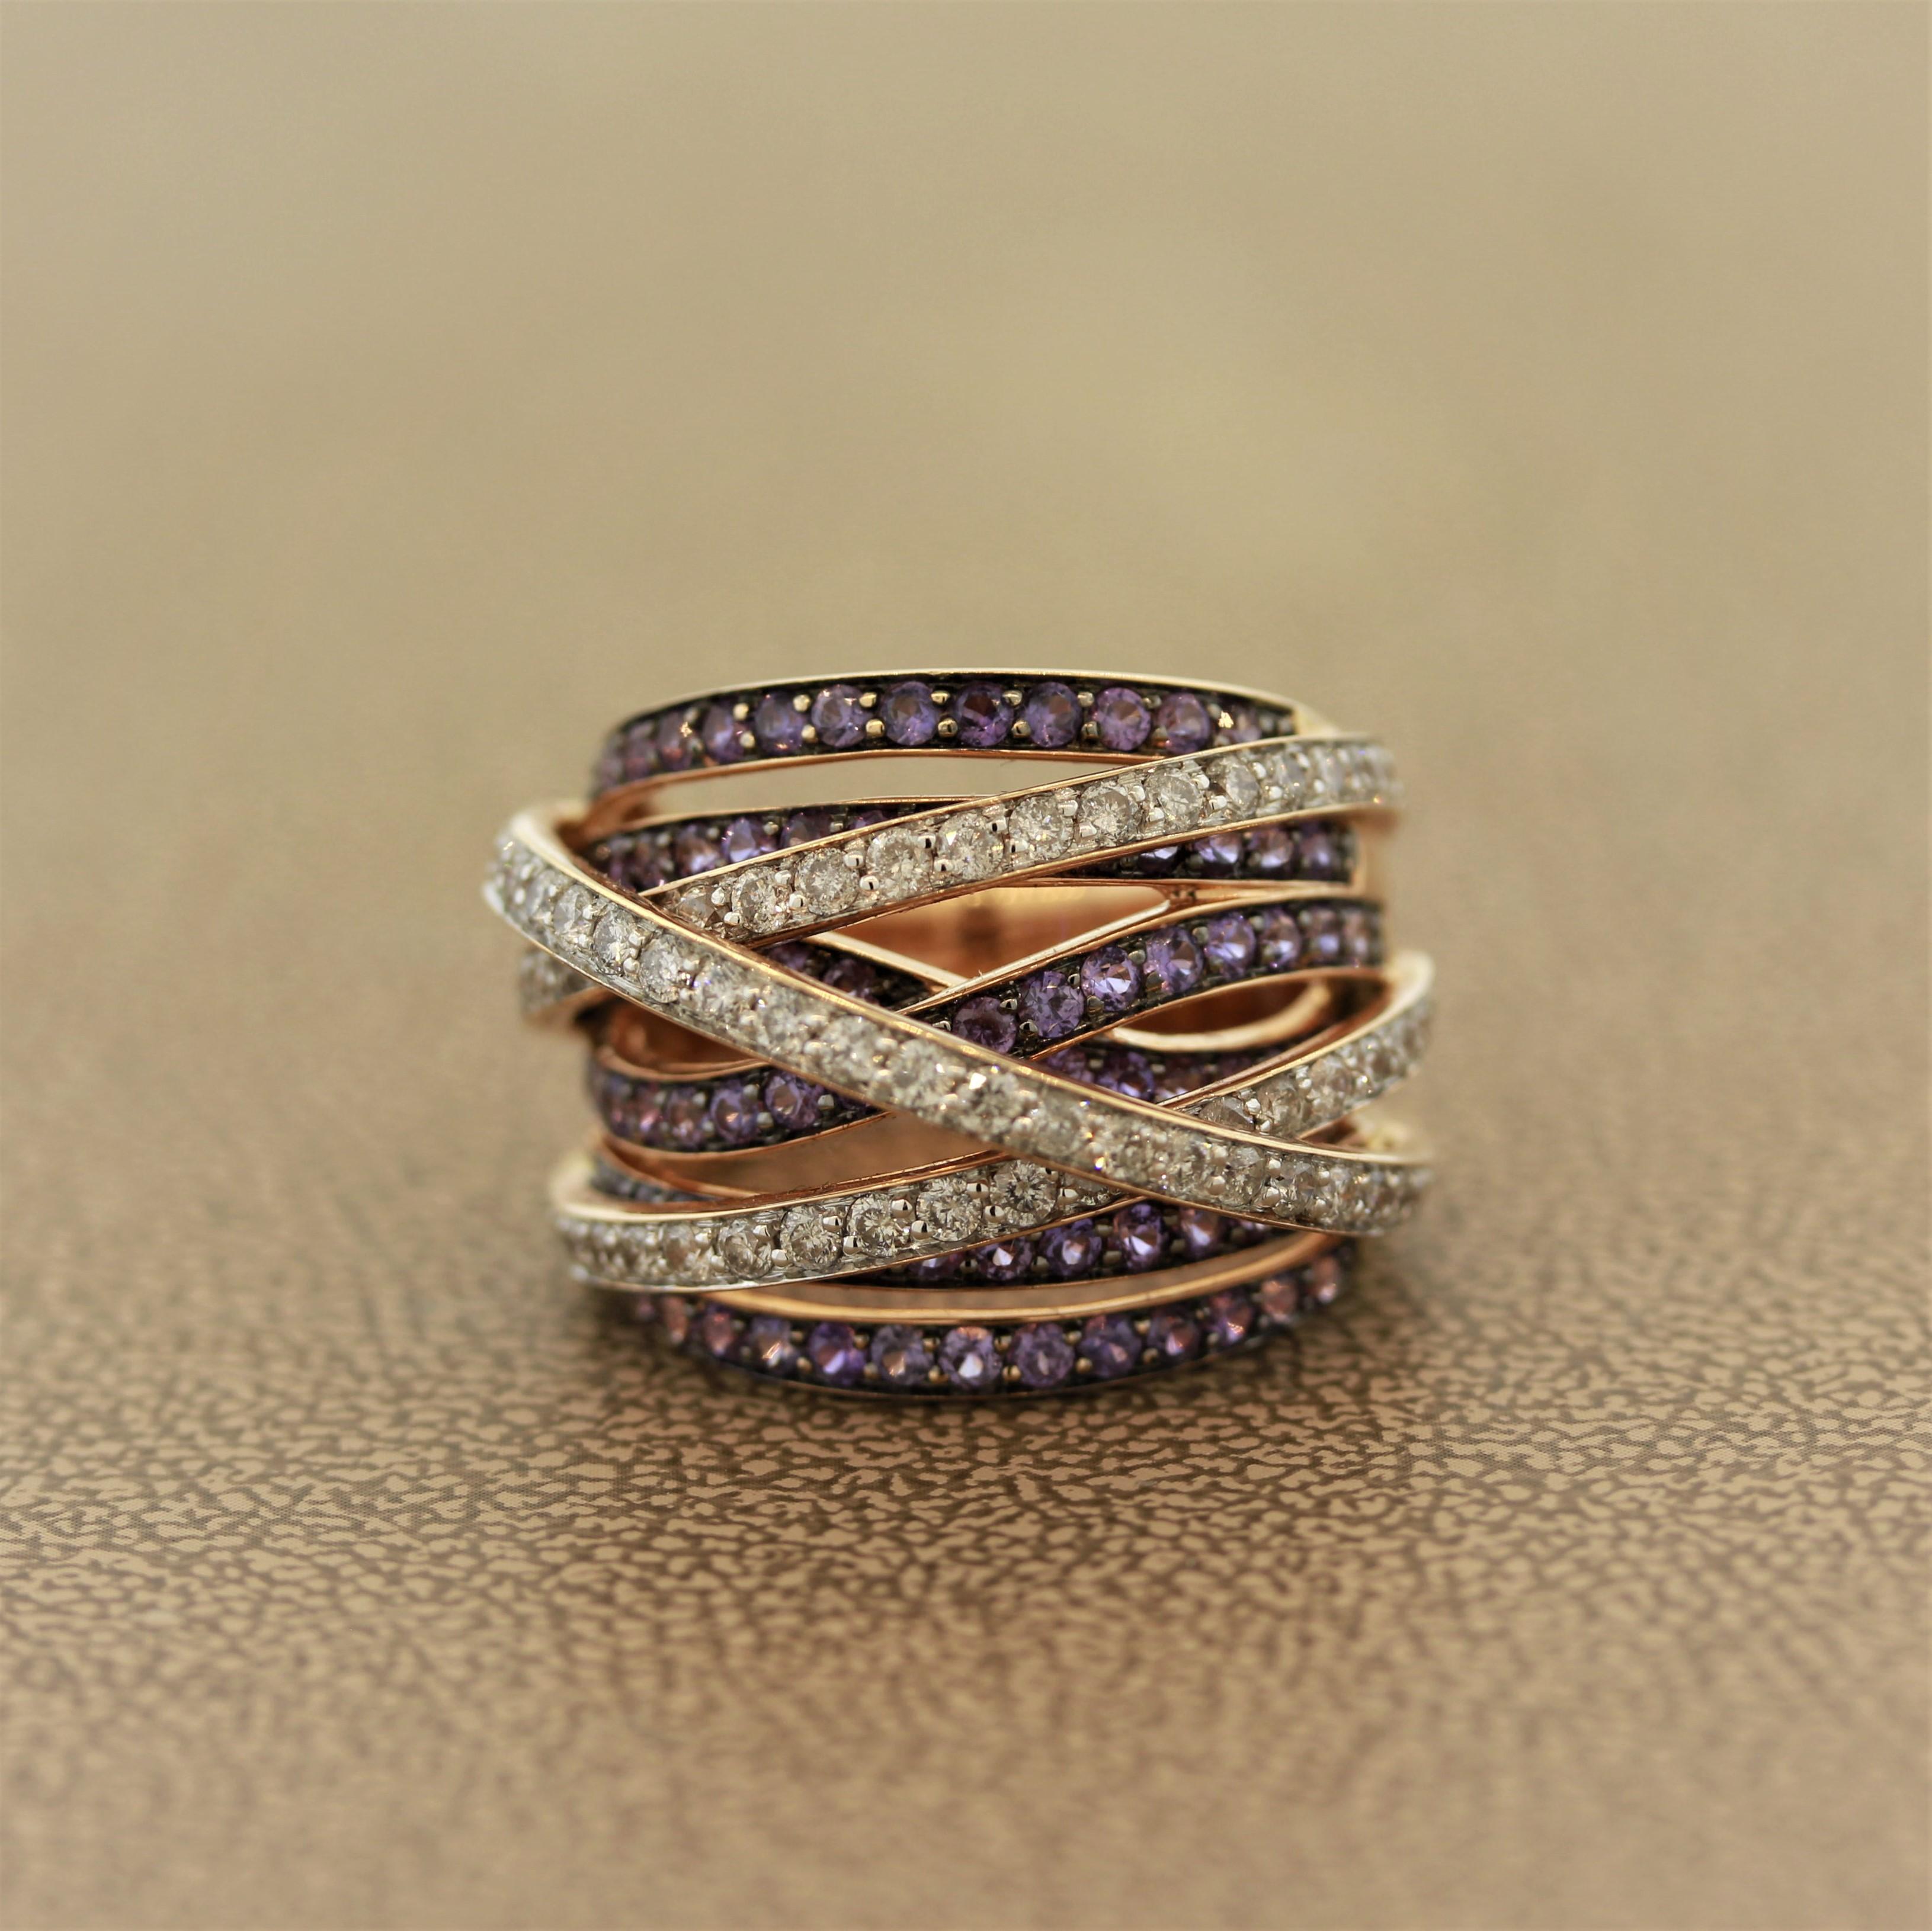 This stylish ring features 1.68 carats of round brilliant cut diamonds along with 2.10 carats of fine purple sapphire. They are set on bridges of 18k rose gold which cross over each other giving this piece a unique style. It can be worn casually